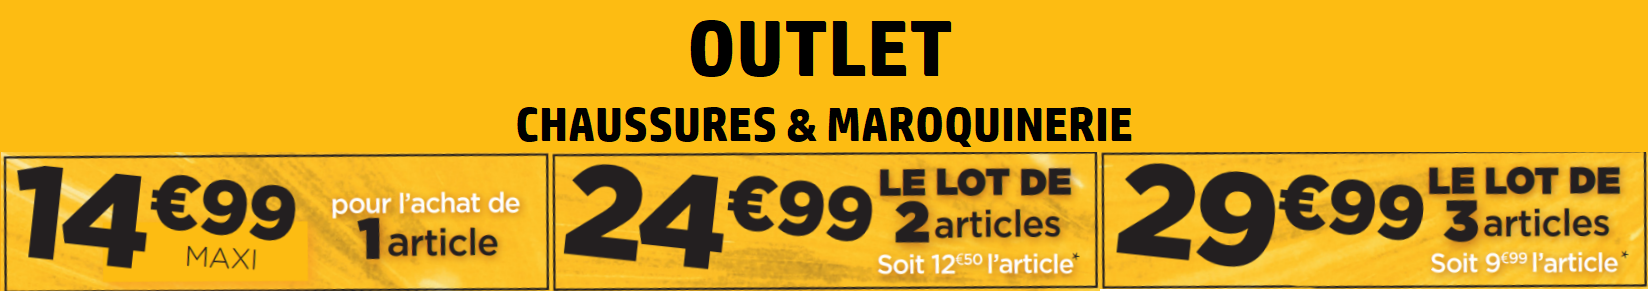 Outlet Jina - Chaussures et Maroquinerie